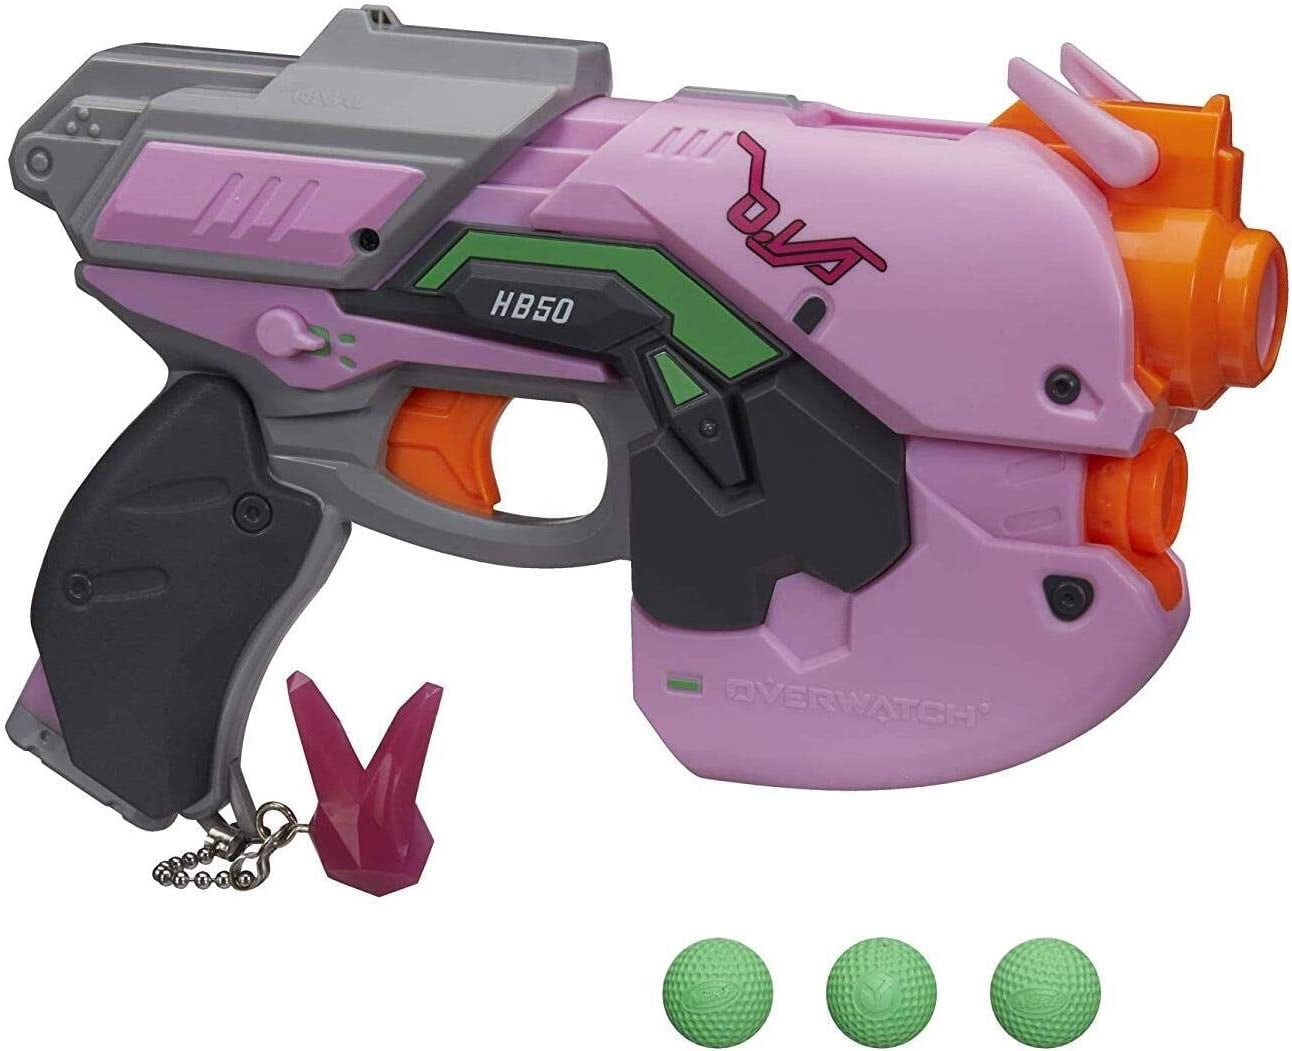 NERF Rival Overwatch D.VA Blaster 3 Overwatch Rounds Ages 14 Toy Gun Fire Fight 